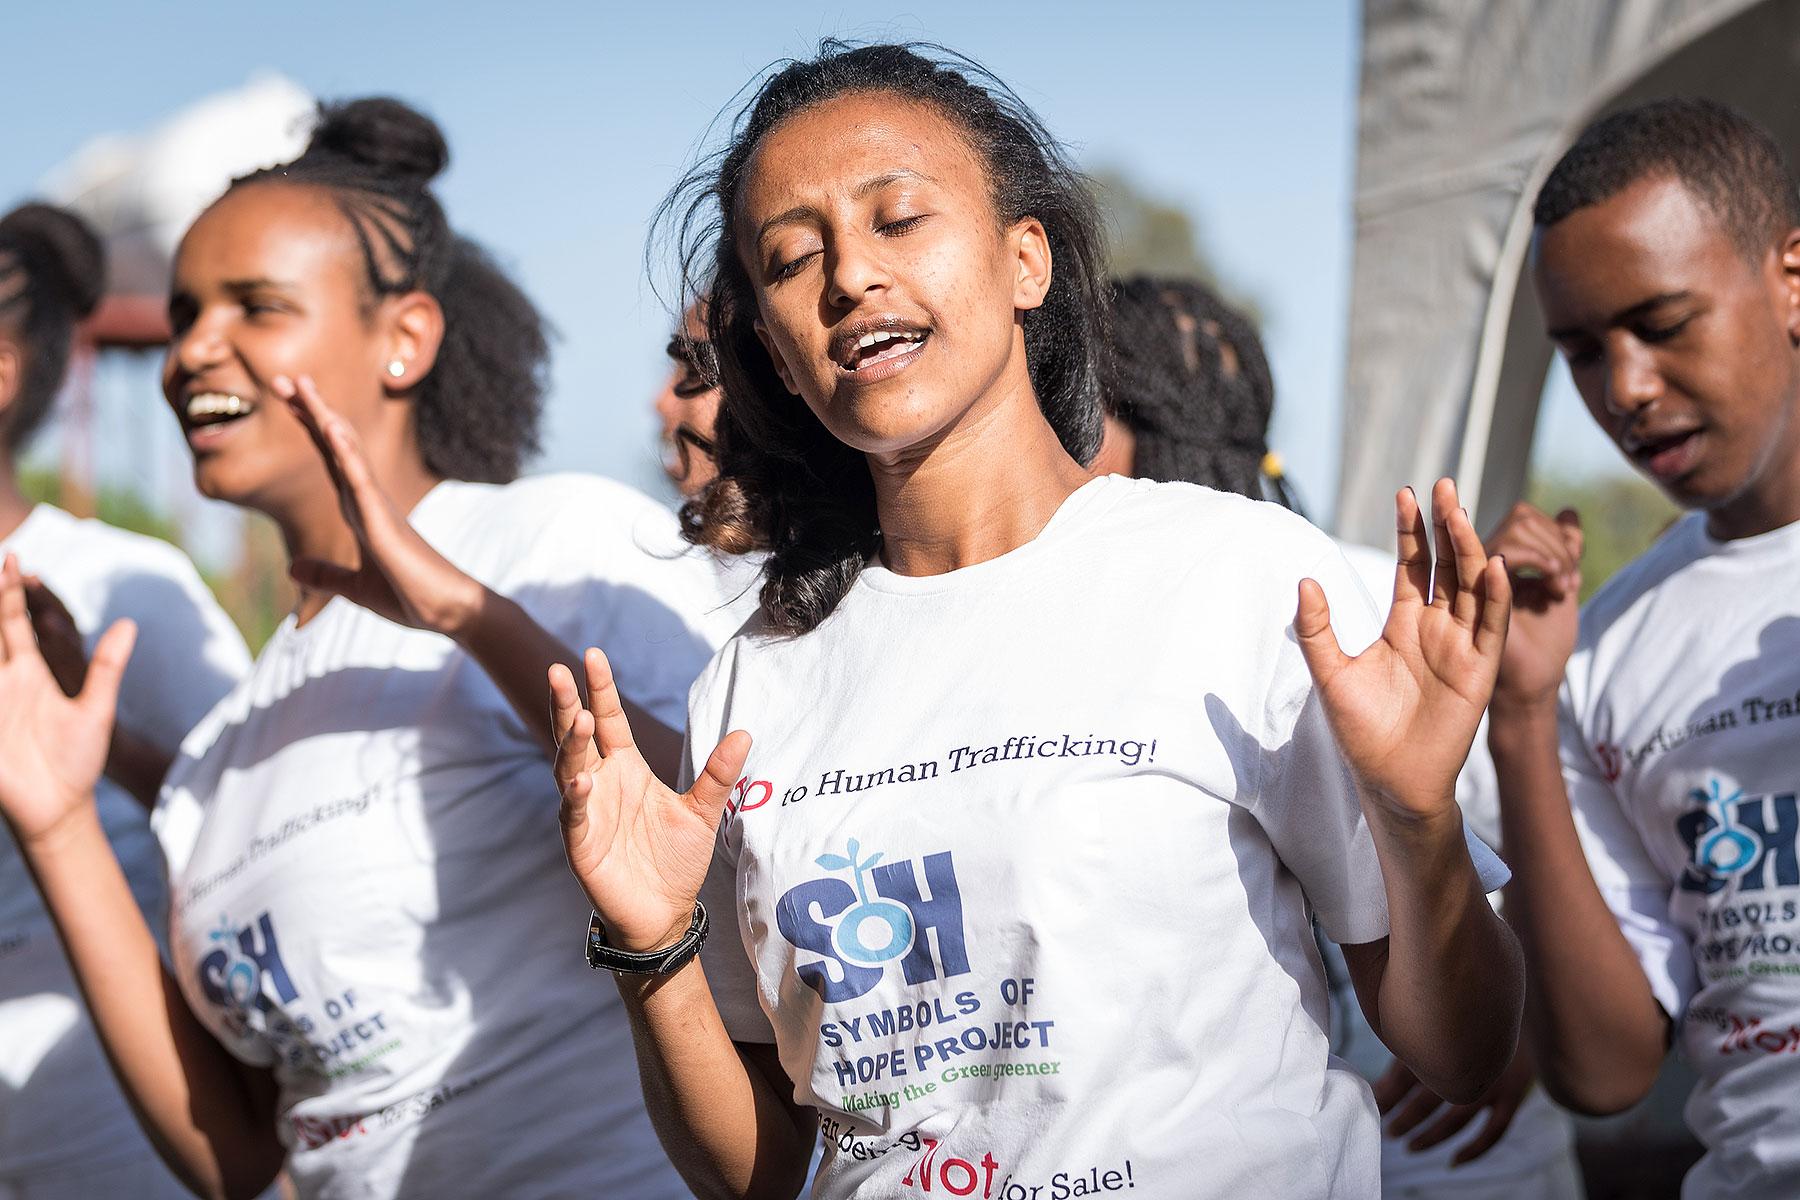 A youth group performs at the inauguration of Bishoftu Integrated Aquaculture Vocational and Entrepreneurship Training Centre in early 2019, taking a stand against human trafficking, and the poverty that often fuels it: âHuman beings â Not for Sale!â All photos: LWF/Albin Hillert